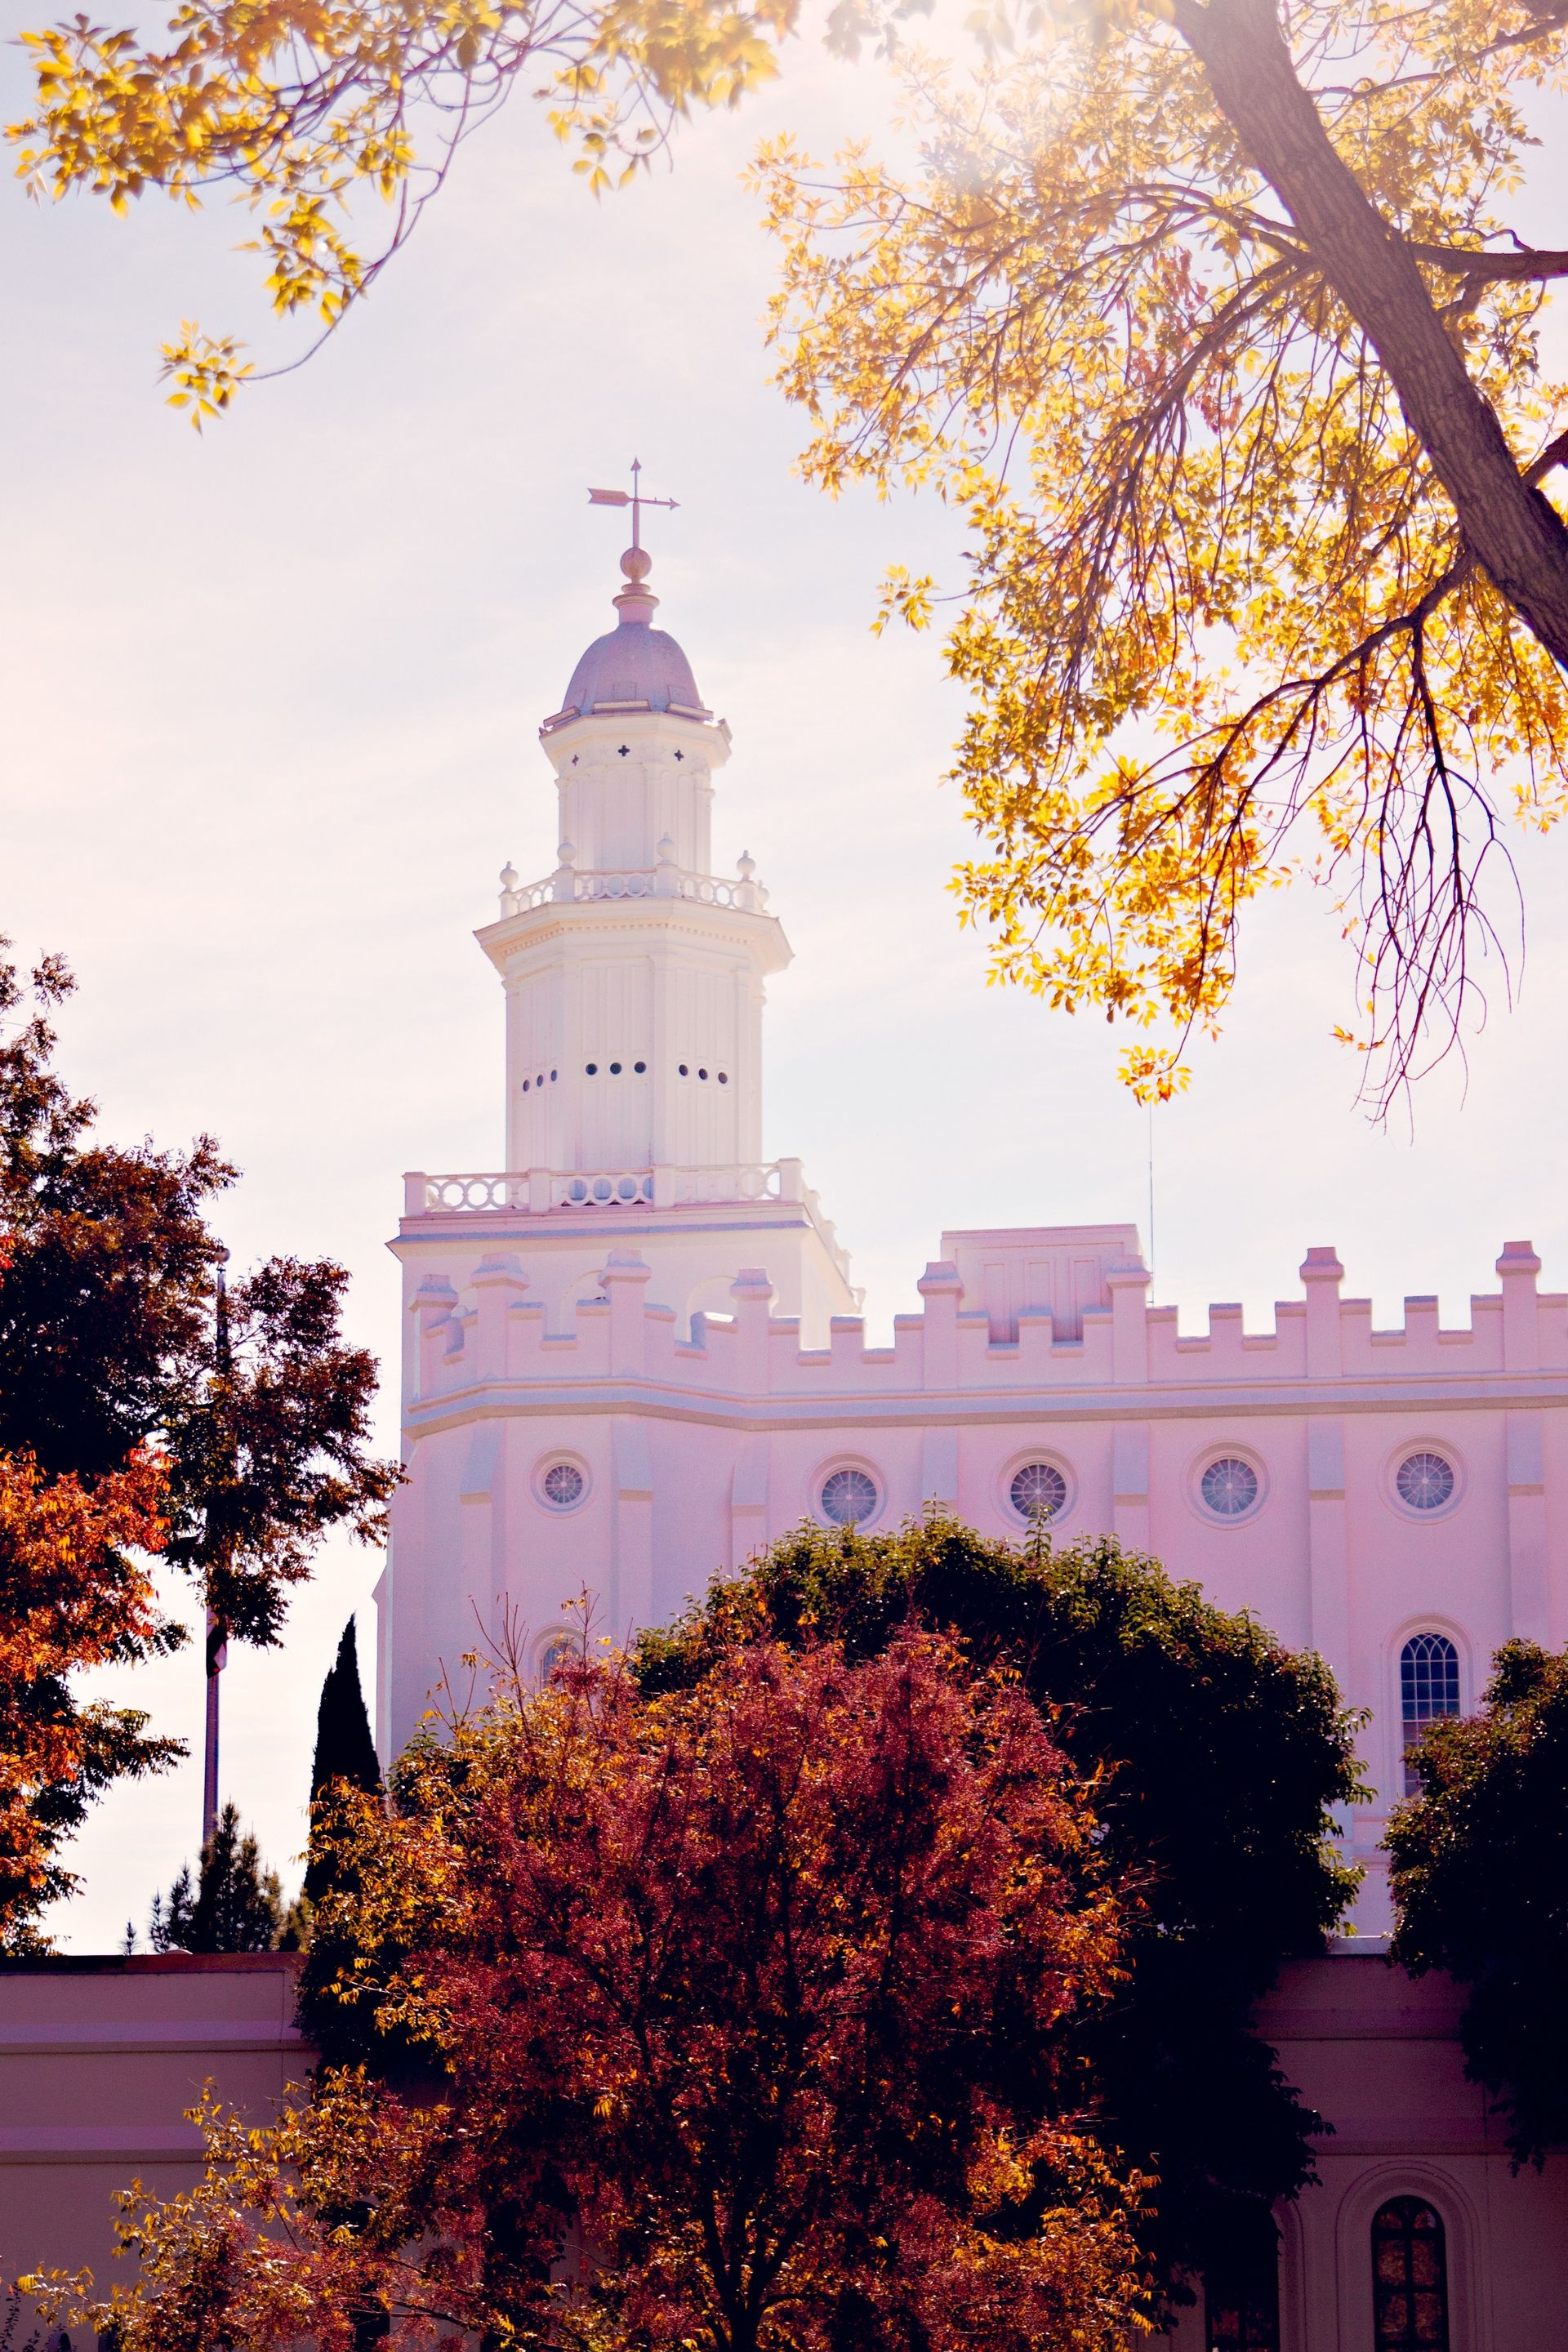 A north view of the St. George Utah Temple in the fall, including scenery.